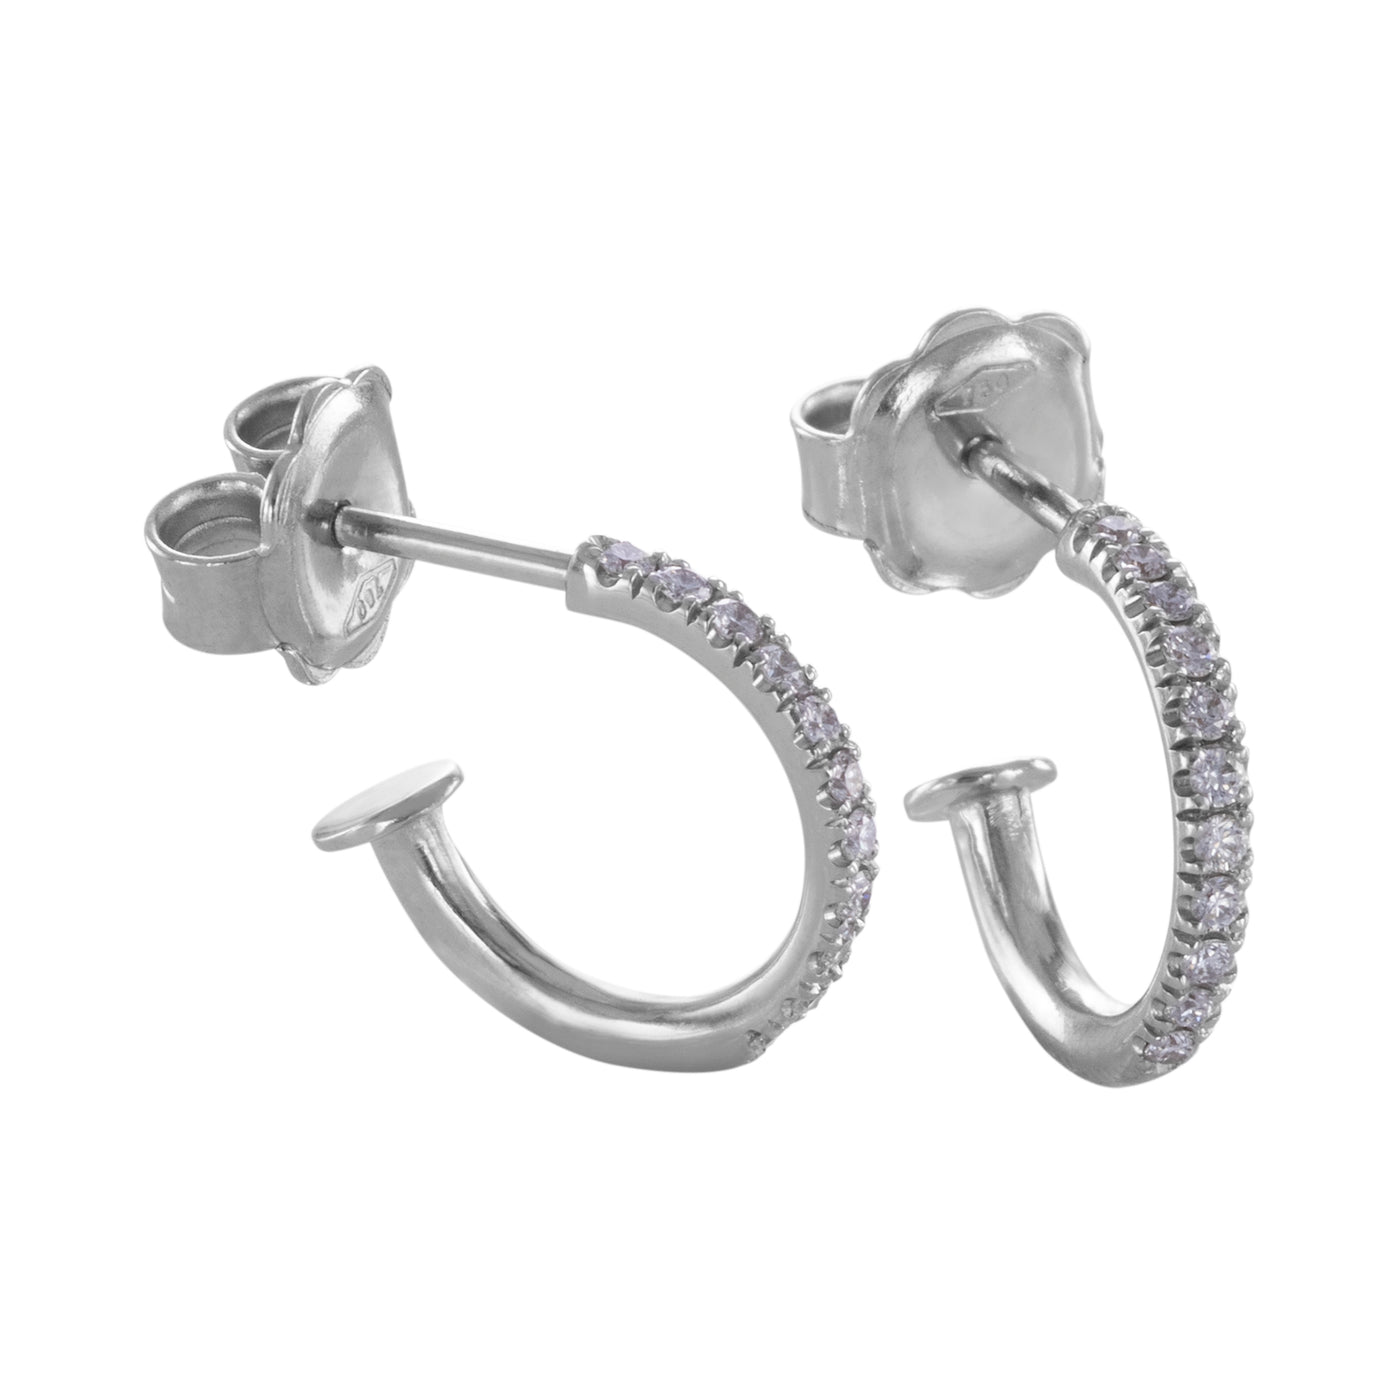 Creoles in white gold and diamonds